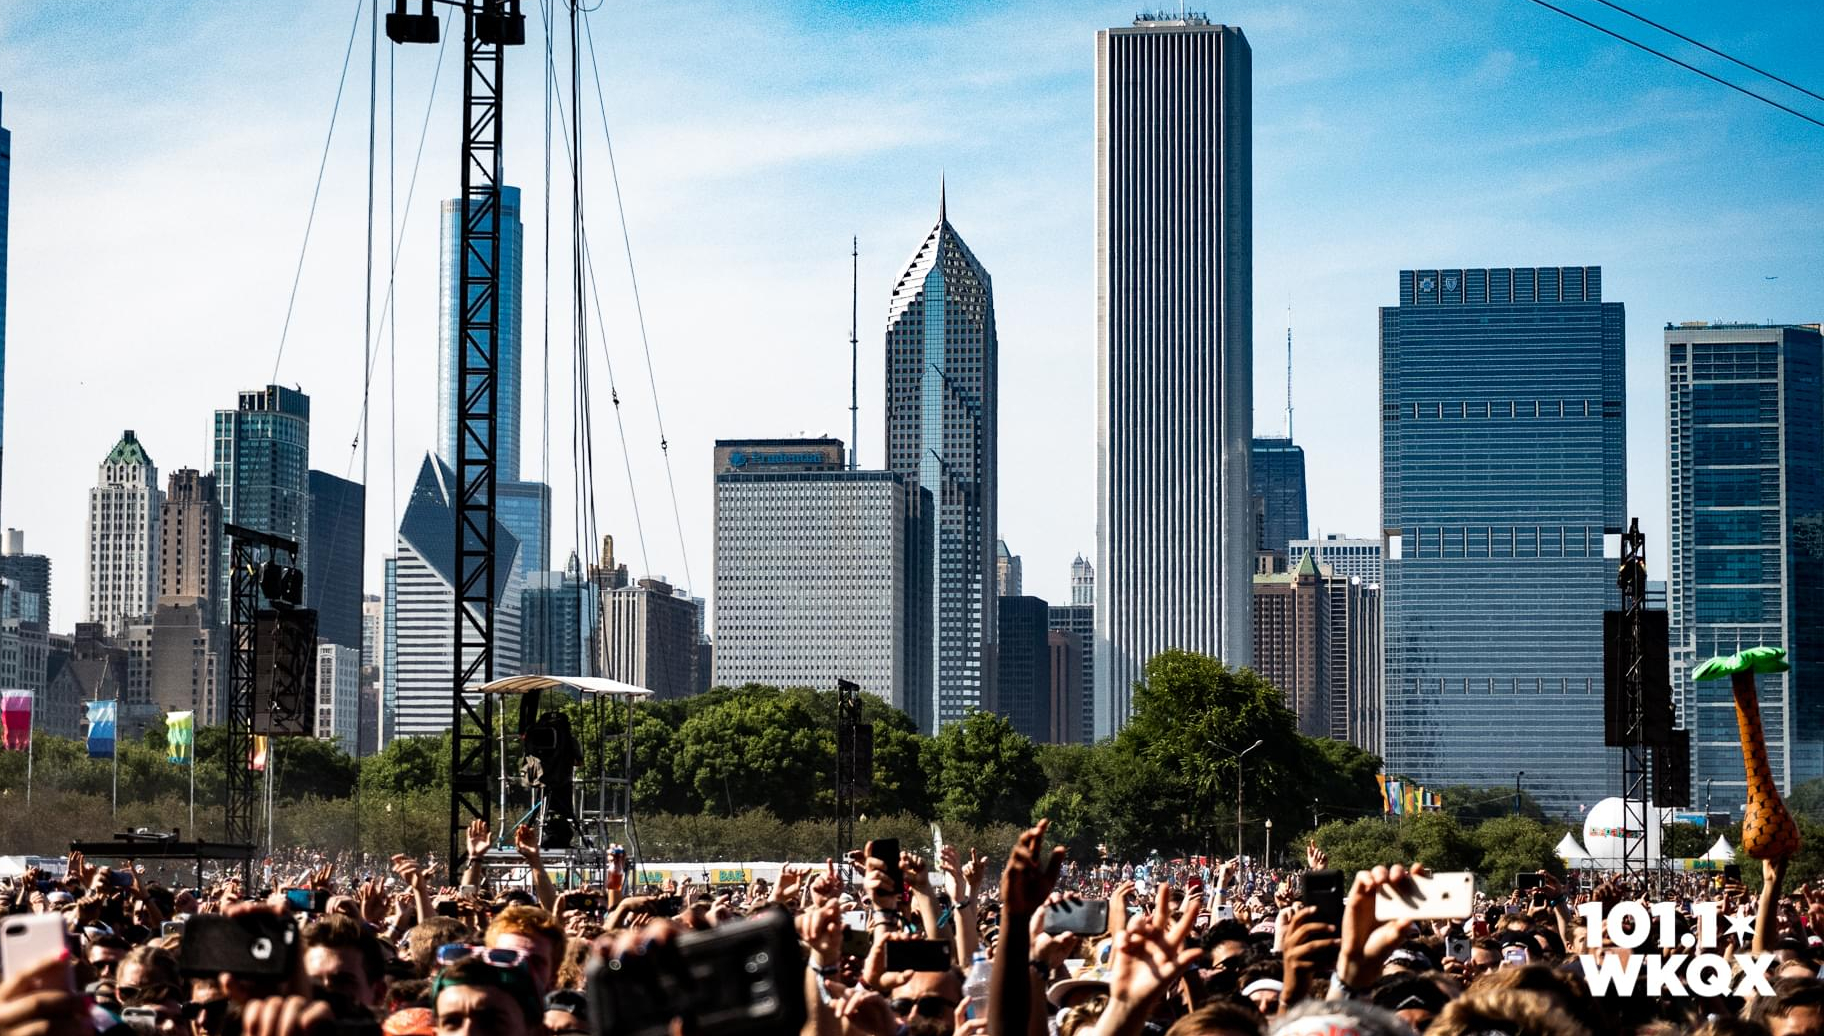 Surprise!  Here’s your Lollapalooza schedule!